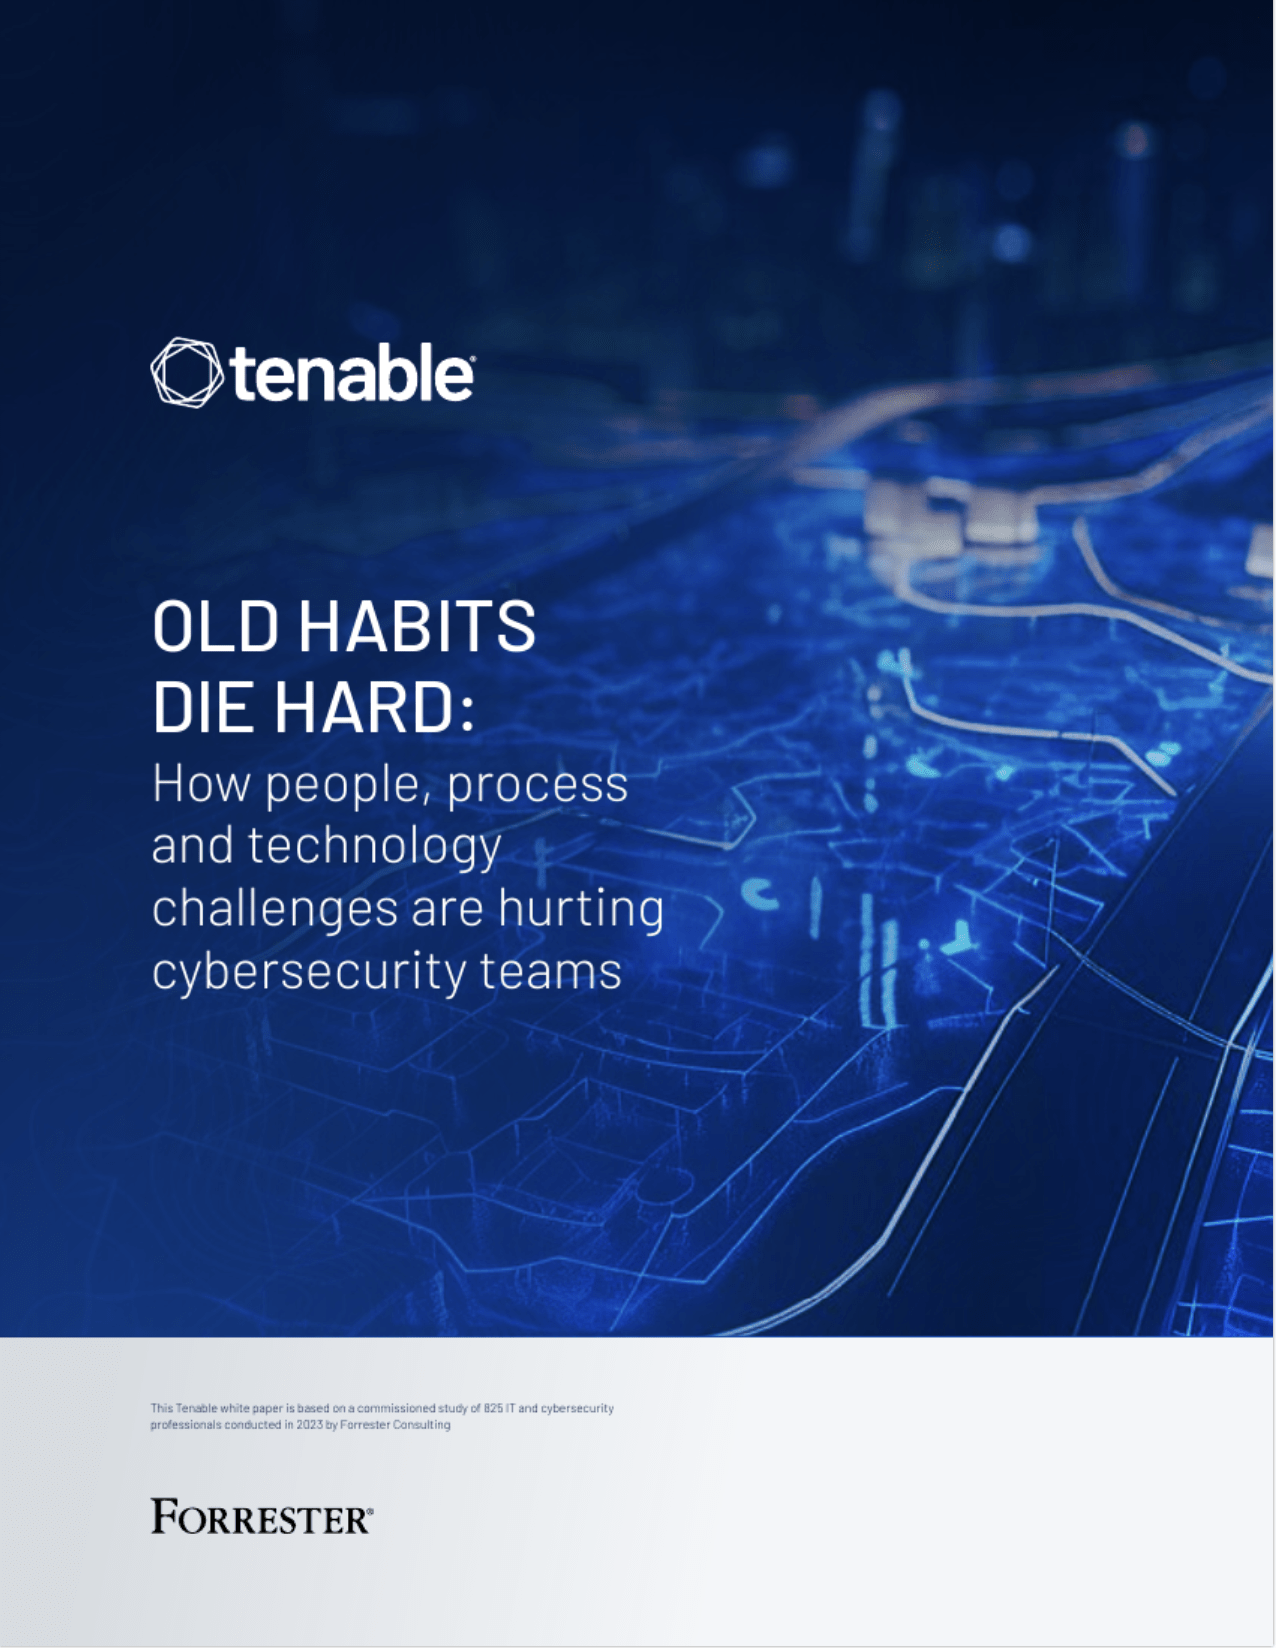 Old Habits Die Hard: How People, Process and Technology Challenges Are Hurting Cybersecurity Teams